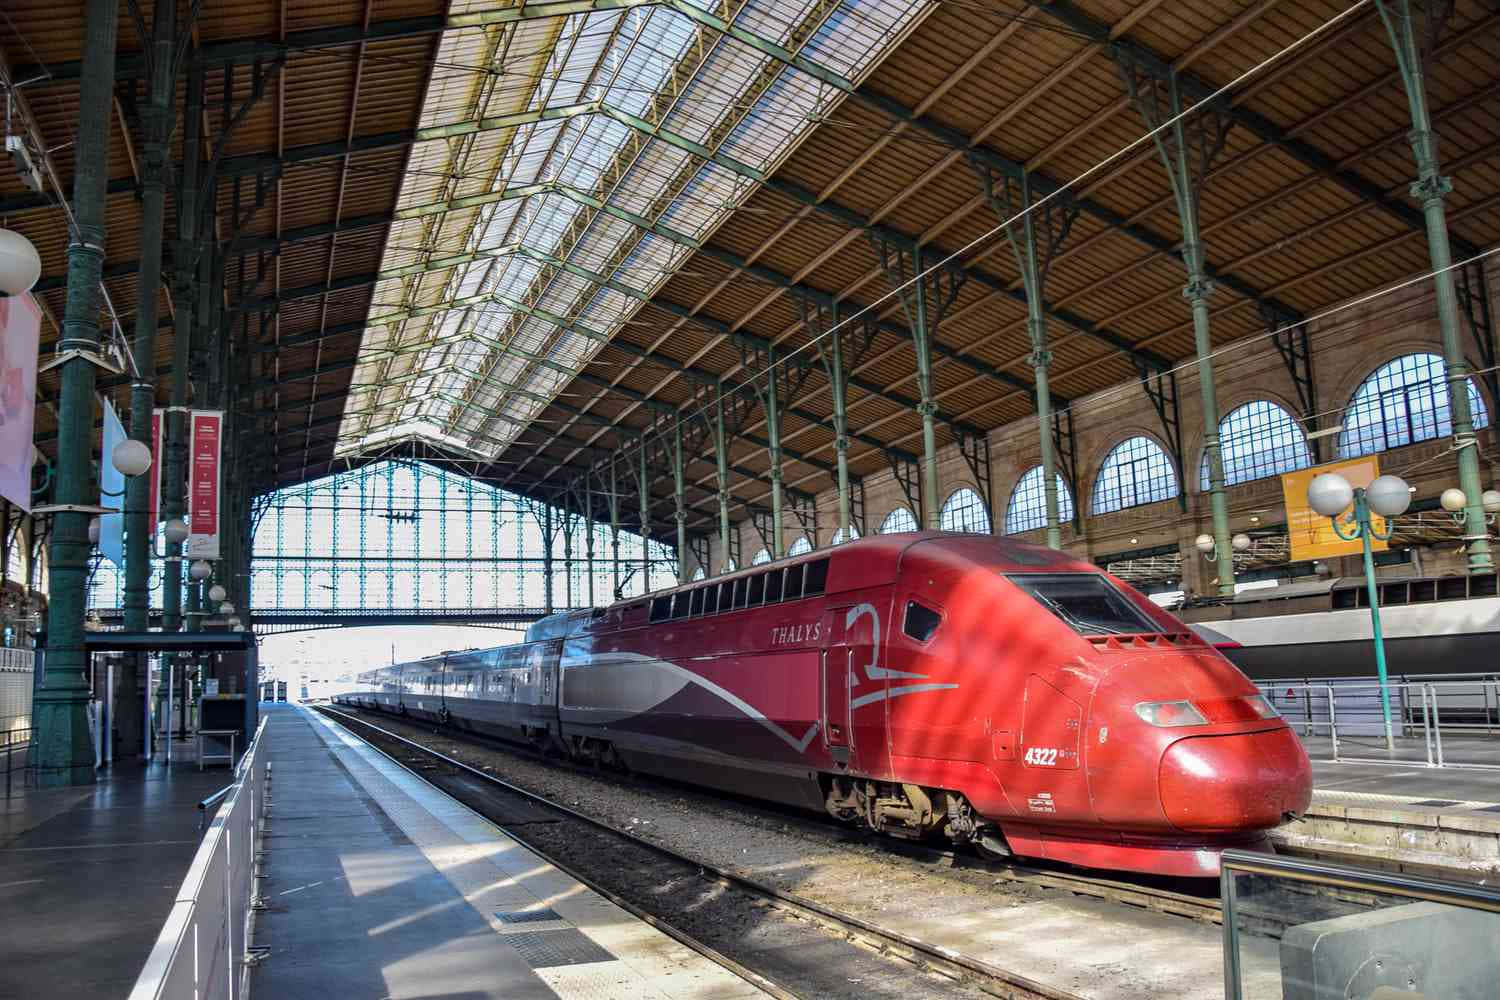 A Red Train Is In A Station With A Glass Roof